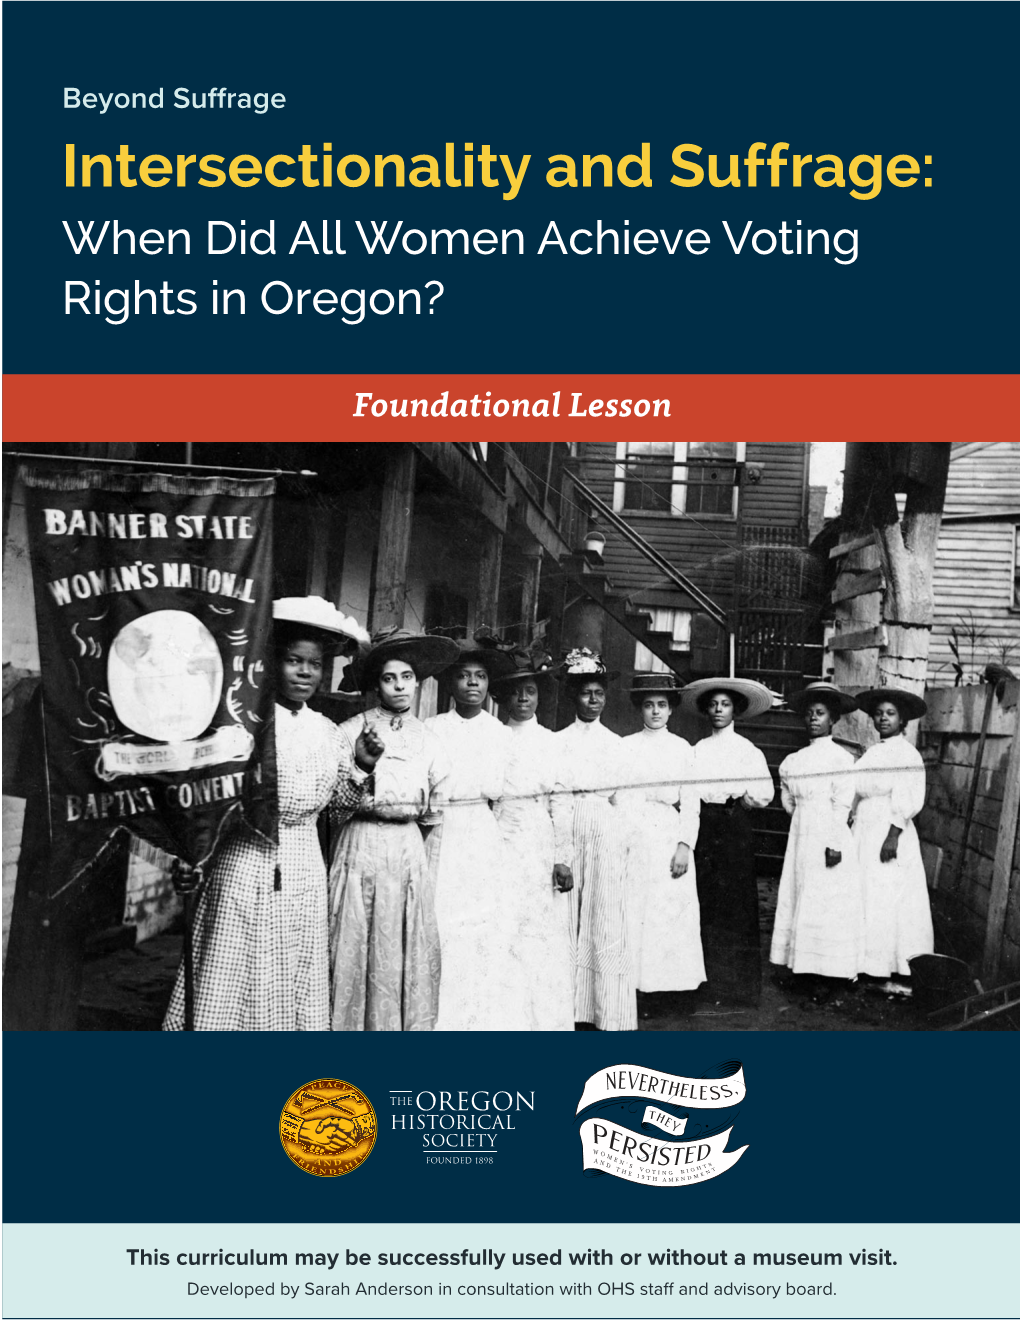 Intersectionality and Suffrage: When Did All Women Achieve Voting Rights in Oregon?